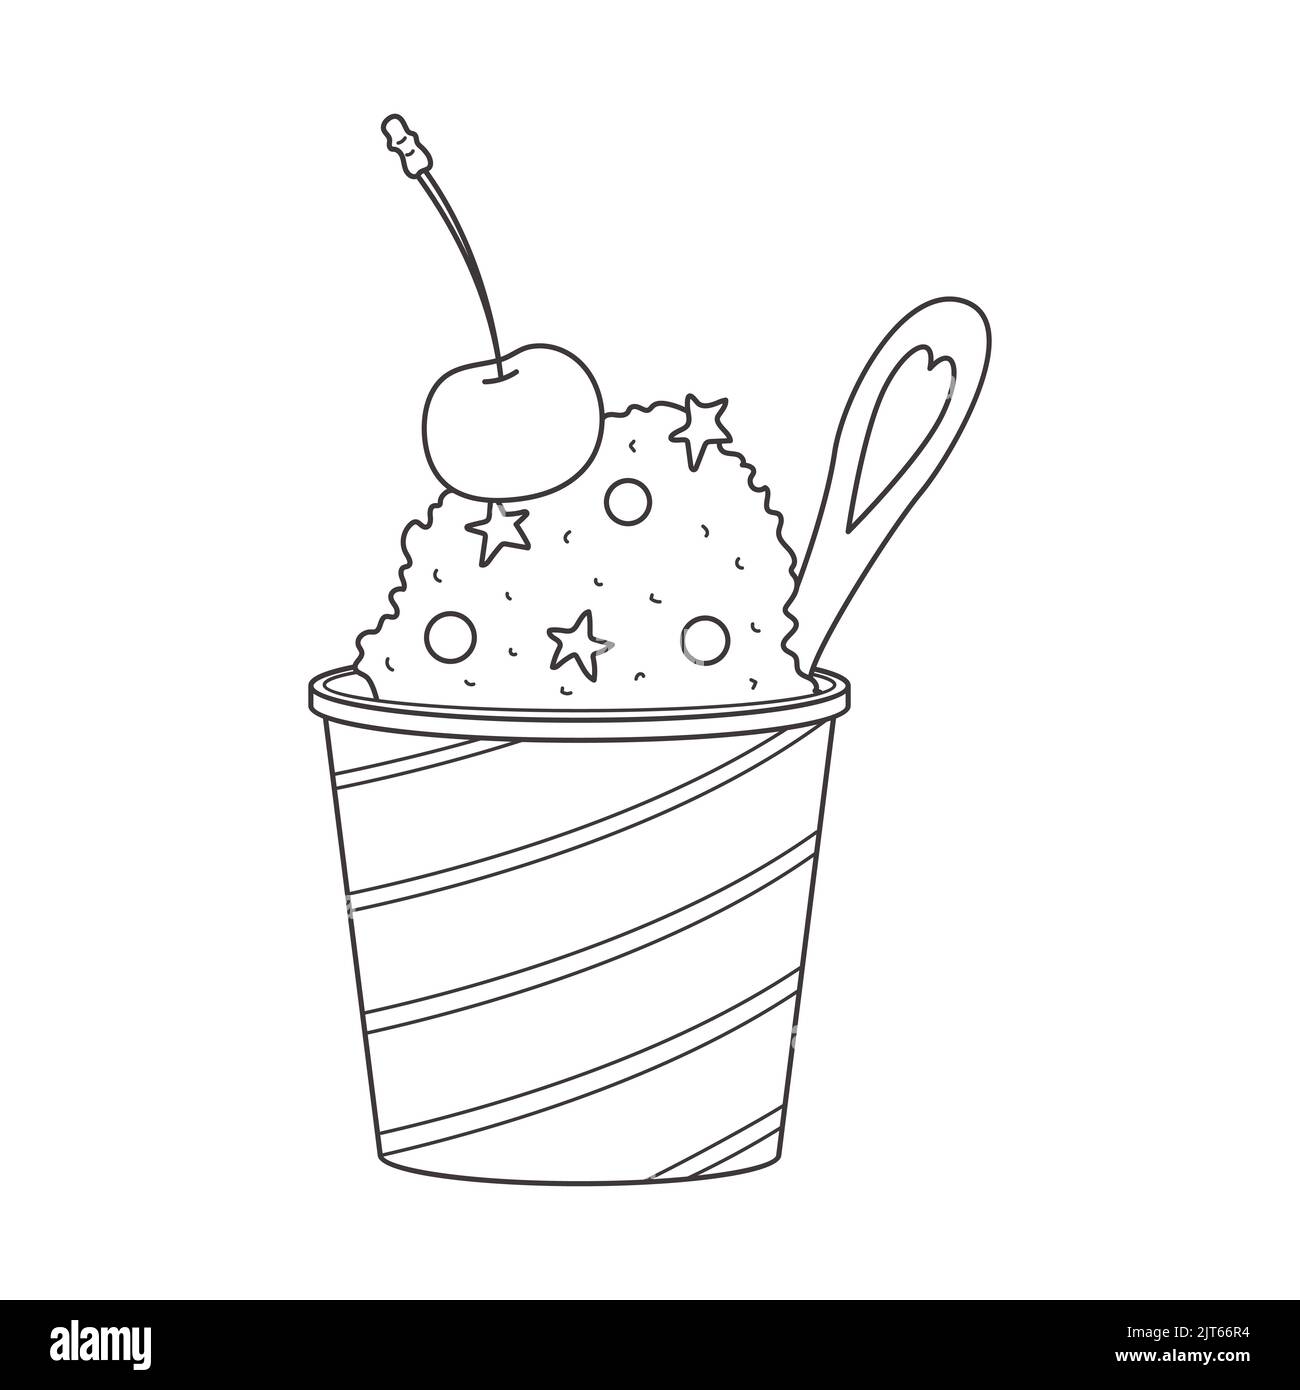 https://c8.alamy.com/comp/2JT66R4/outline-ice-cream-with-sprinkles-cherry-and-spoon-in-a-striped-bucket-dairy-cold-dessert-seasonal-sweet-food-black-and-white-doodle-hand-drawn-vec-2JT66R4.jpg